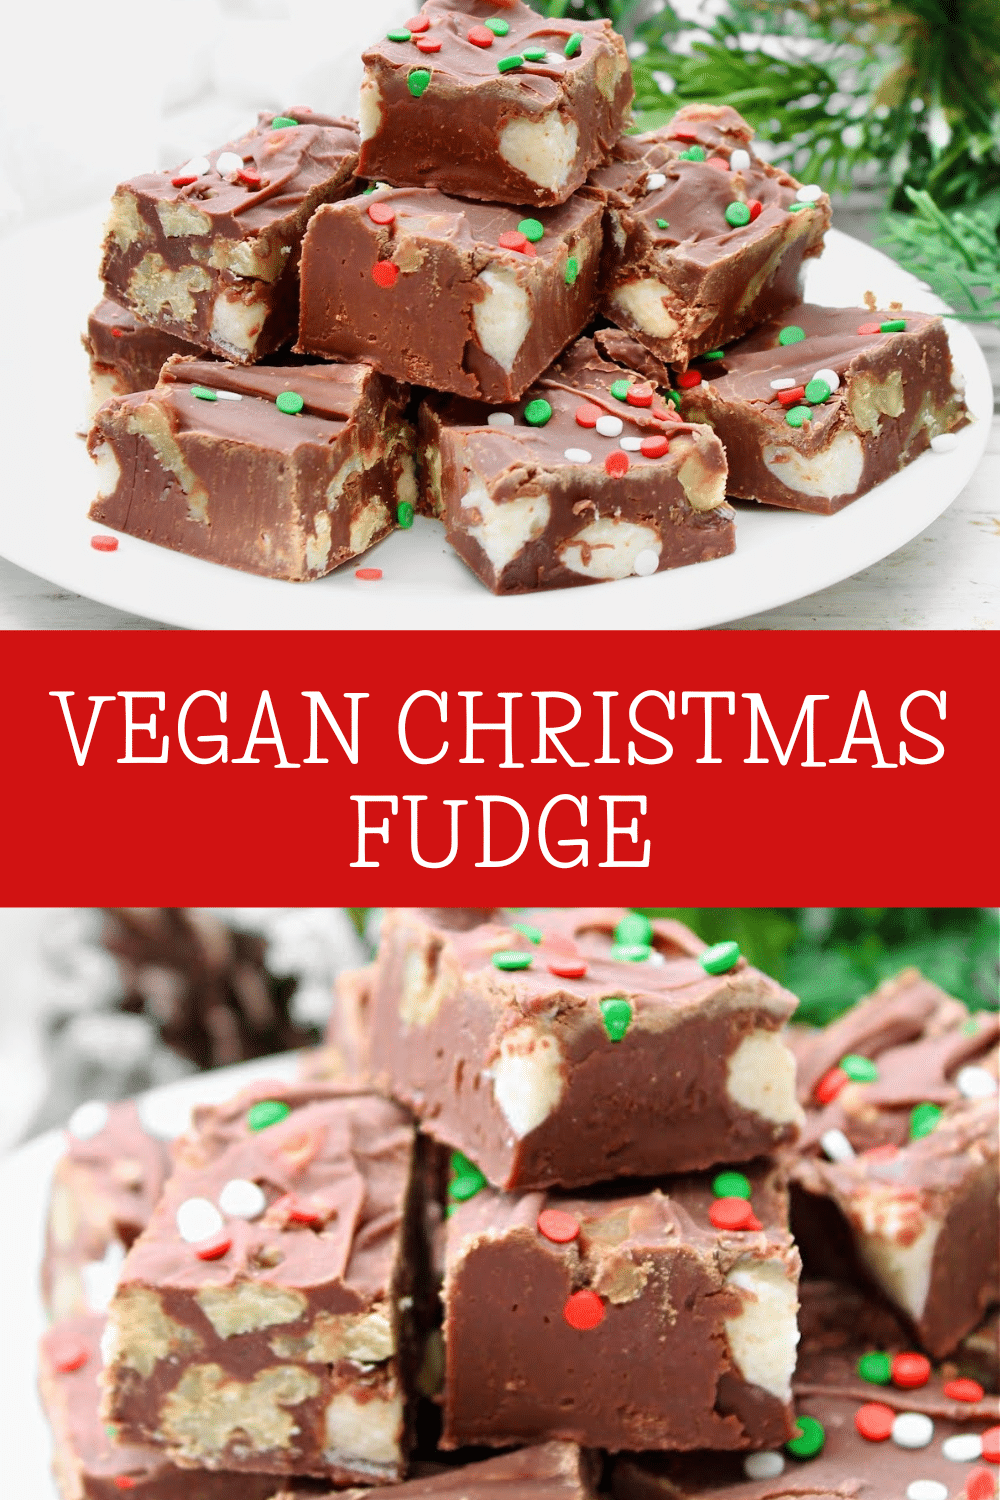 Vegan Christmas Fudge ~ This rich and creamy chocolate fudge is easy to make in the microwave with just 5 simple ingredients! via @thiswifecooks